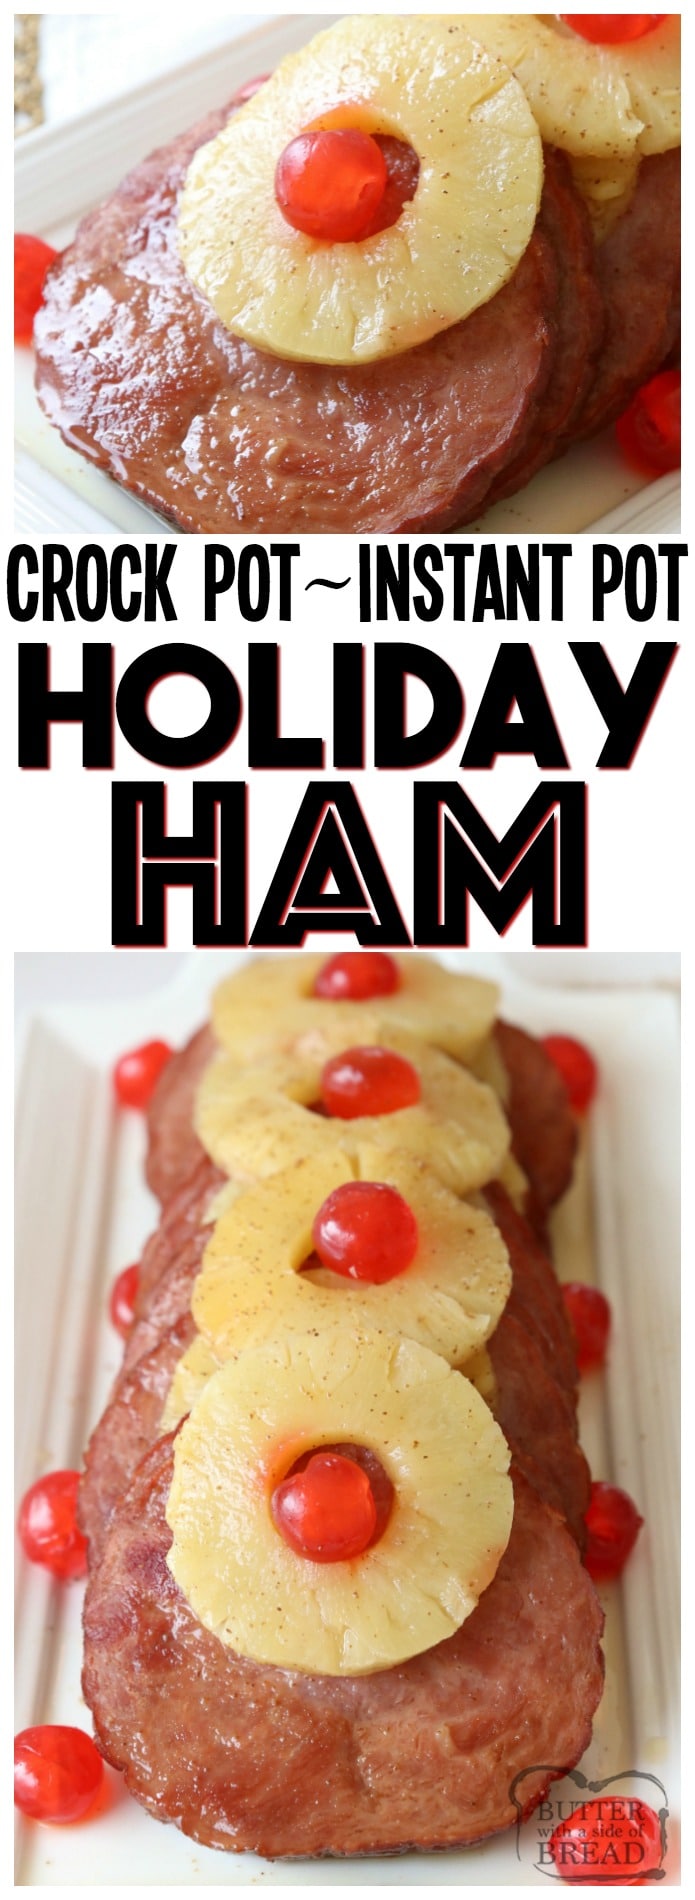 Crock Pot Ham is my favorite holiday ham recipe! Just 4 ingredients and can be made in the crockpot or Instant Pot. Brown sugar and pineapple provide a sweet, tangy flavor to the ham. Quick & easy slow cooker ham recipe that takes just minutes to prepare and yields tender, flavorful and juicy ham.